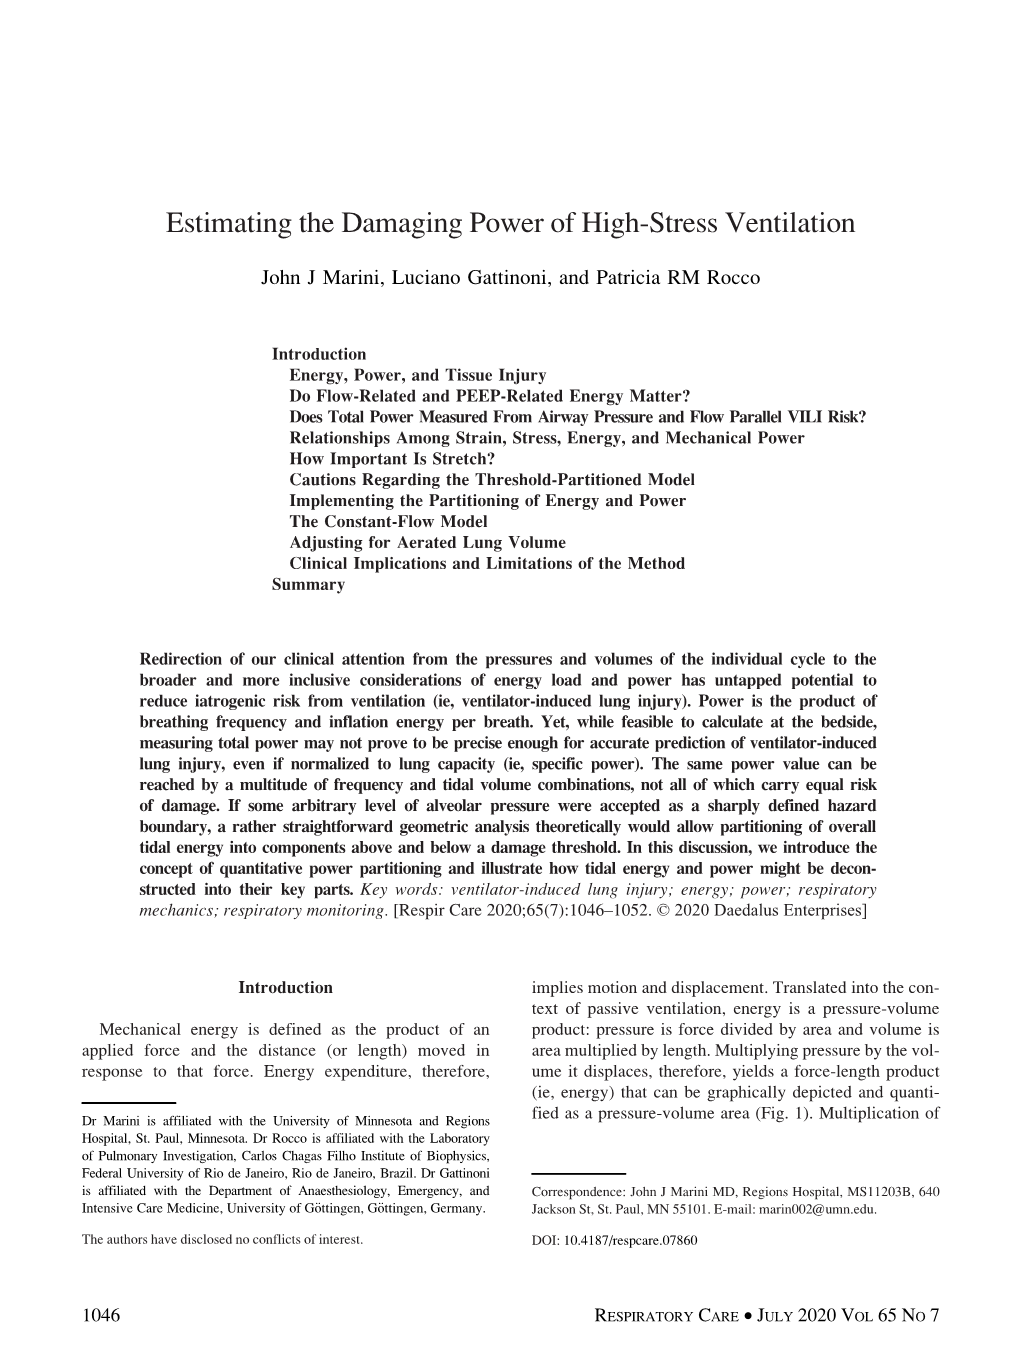 Estimating the Damaging Power of High-Stress Ventilation